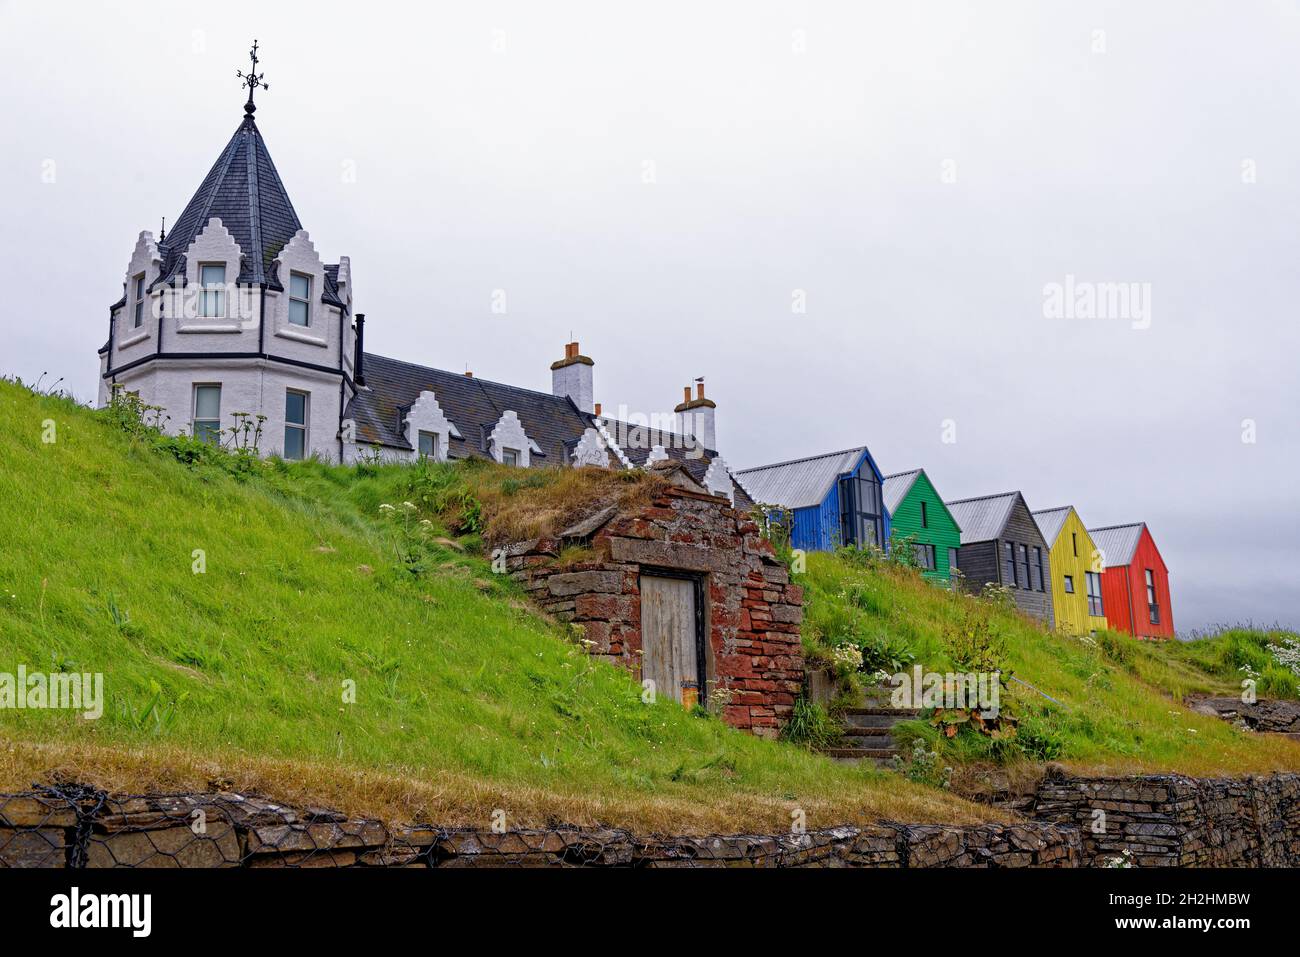 The Inn at John o'Groats hotel on the North Coast 500 tourist motoring route in northern Scotland, UK - 18th of July 2021 Stock Photo